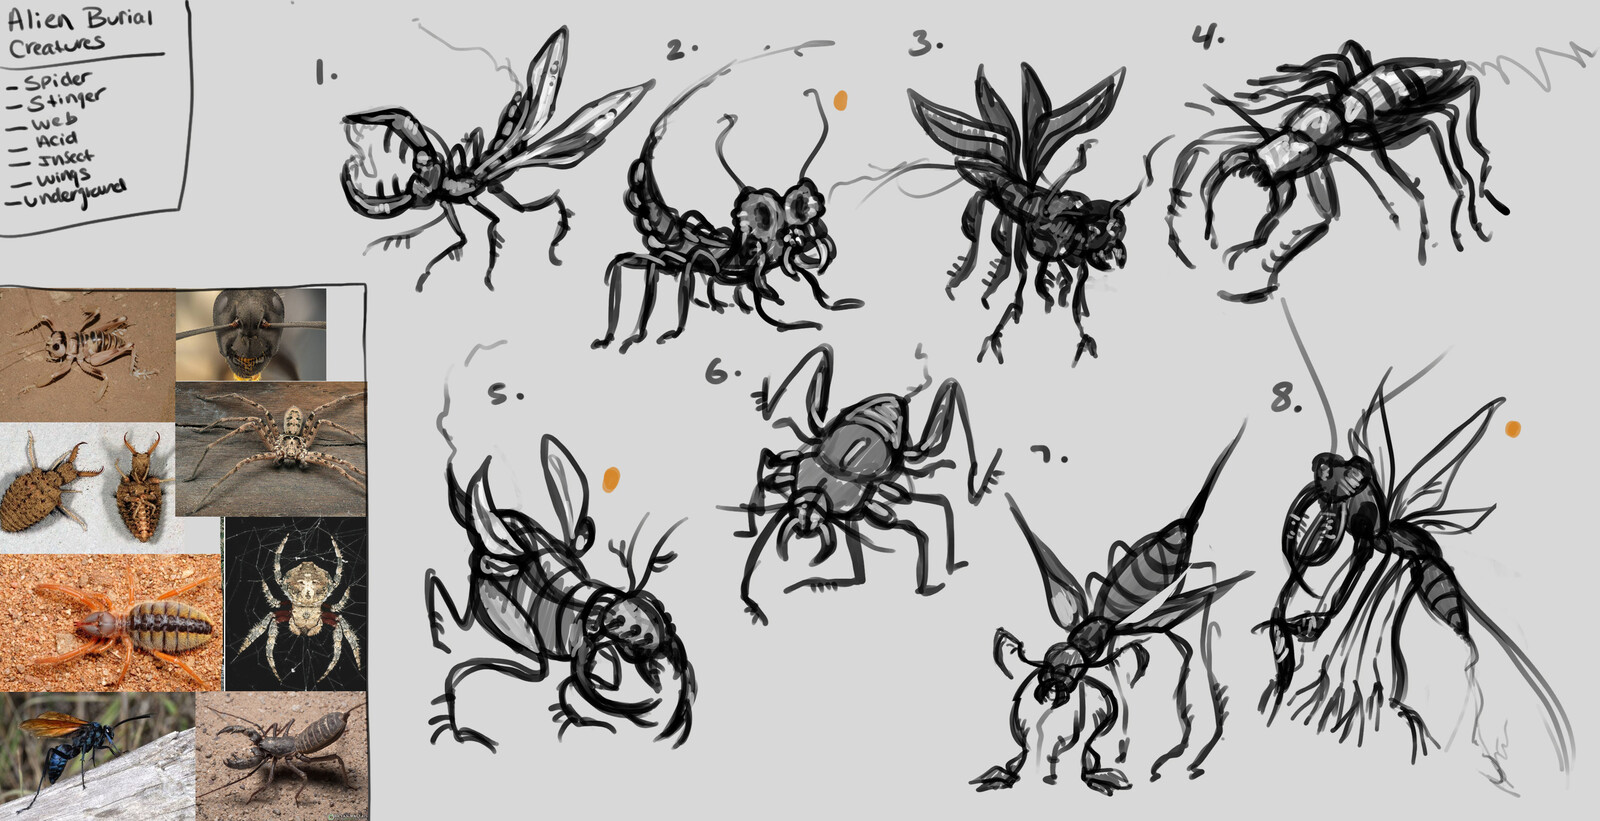 Quick thumbnail sketches of the spider-Alien creatures that bury underground. I also wanted to give them a way to fly. 